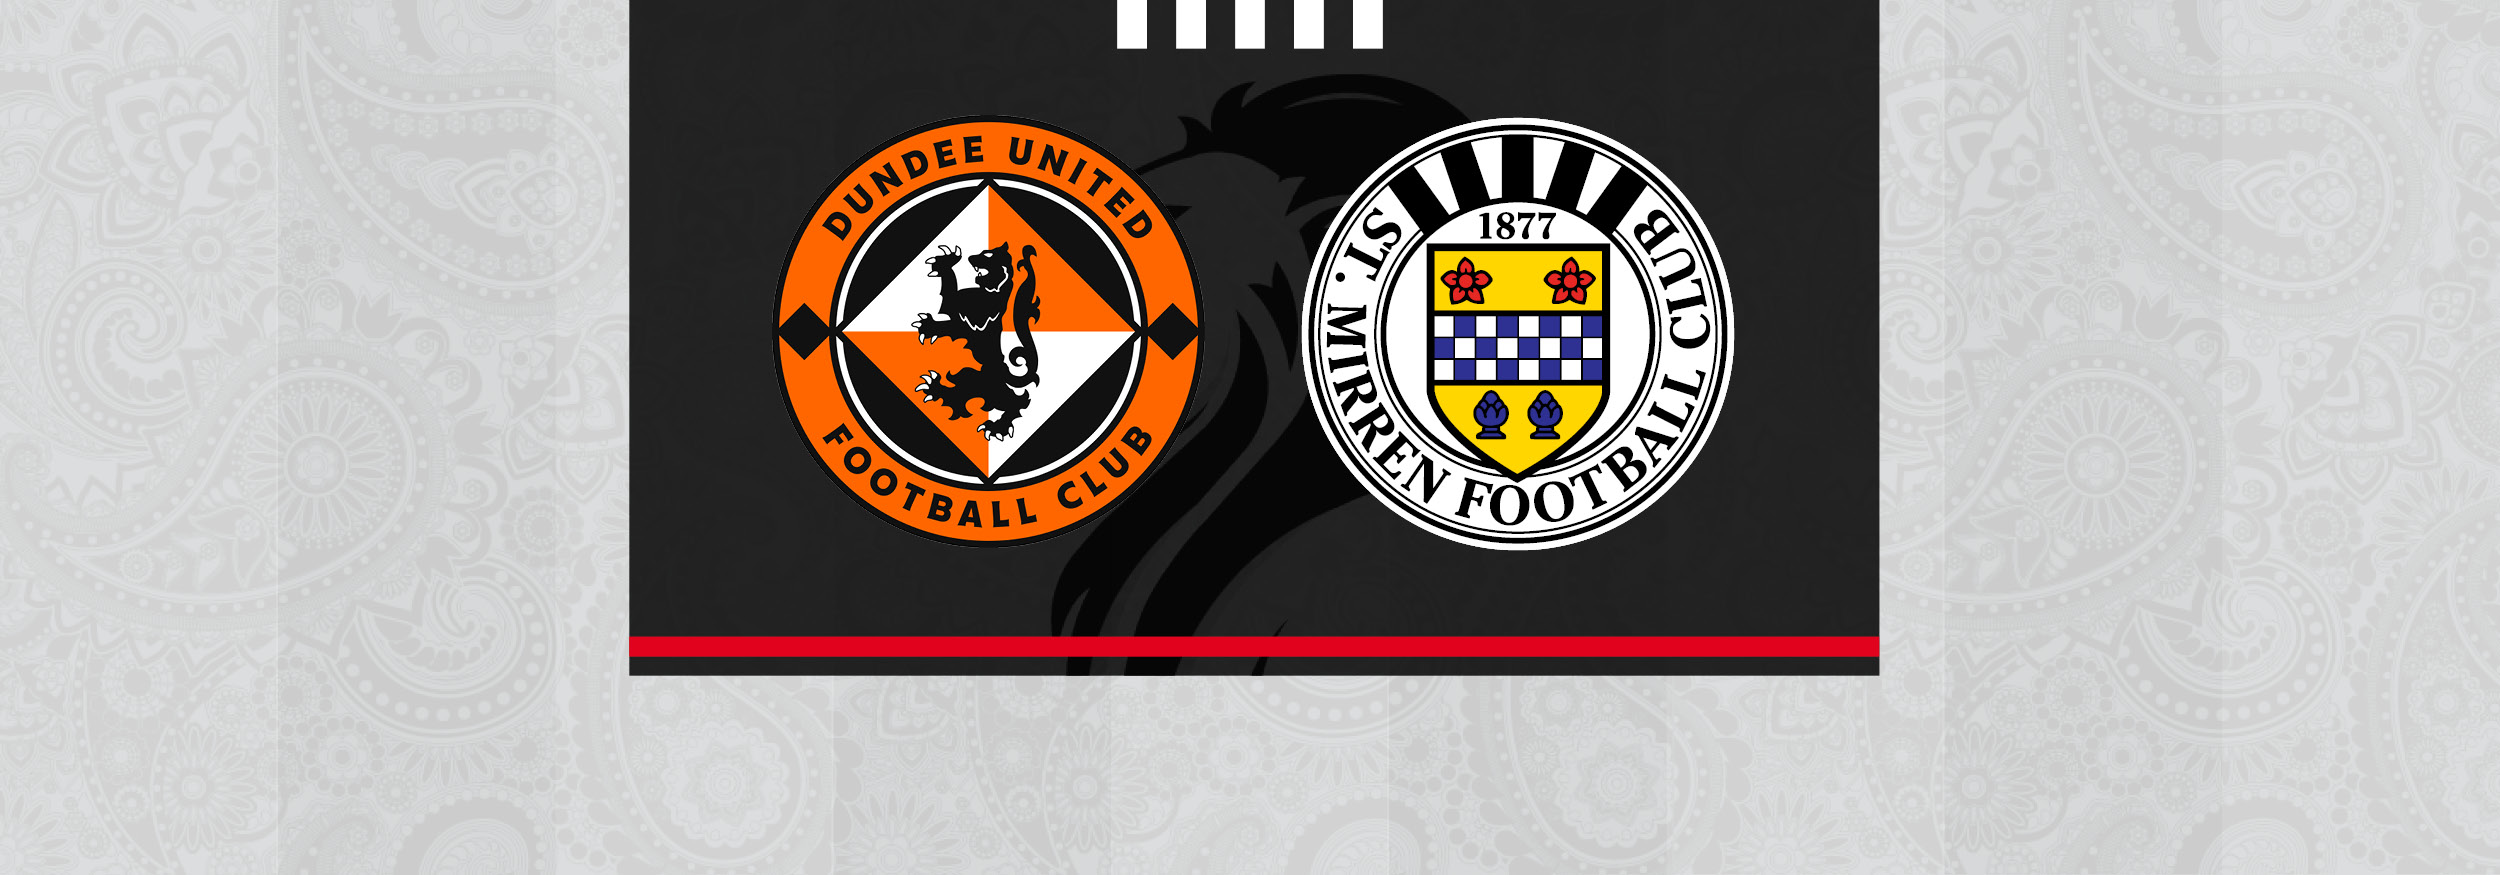 Ticket Info: Dundee United v St Mirren (20th Aug)